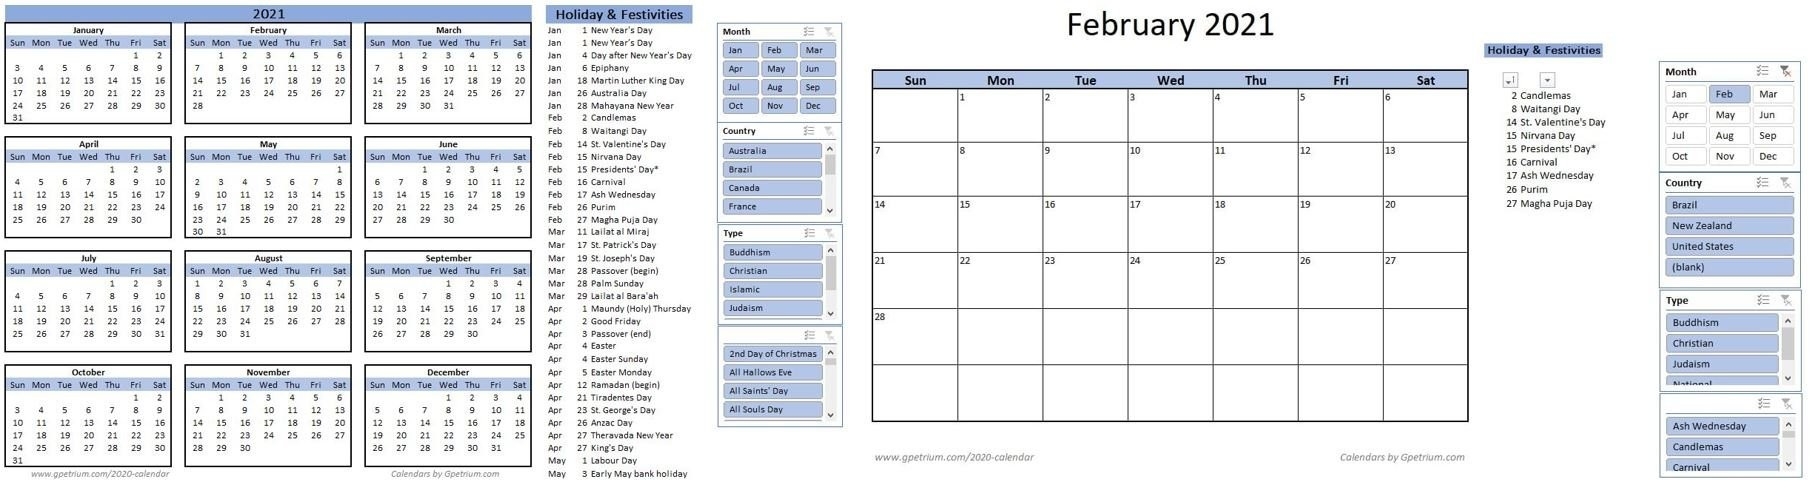 Free 2021 Calendar Template In Excel – Gpetrium-Excel List Of 2021 Holidays